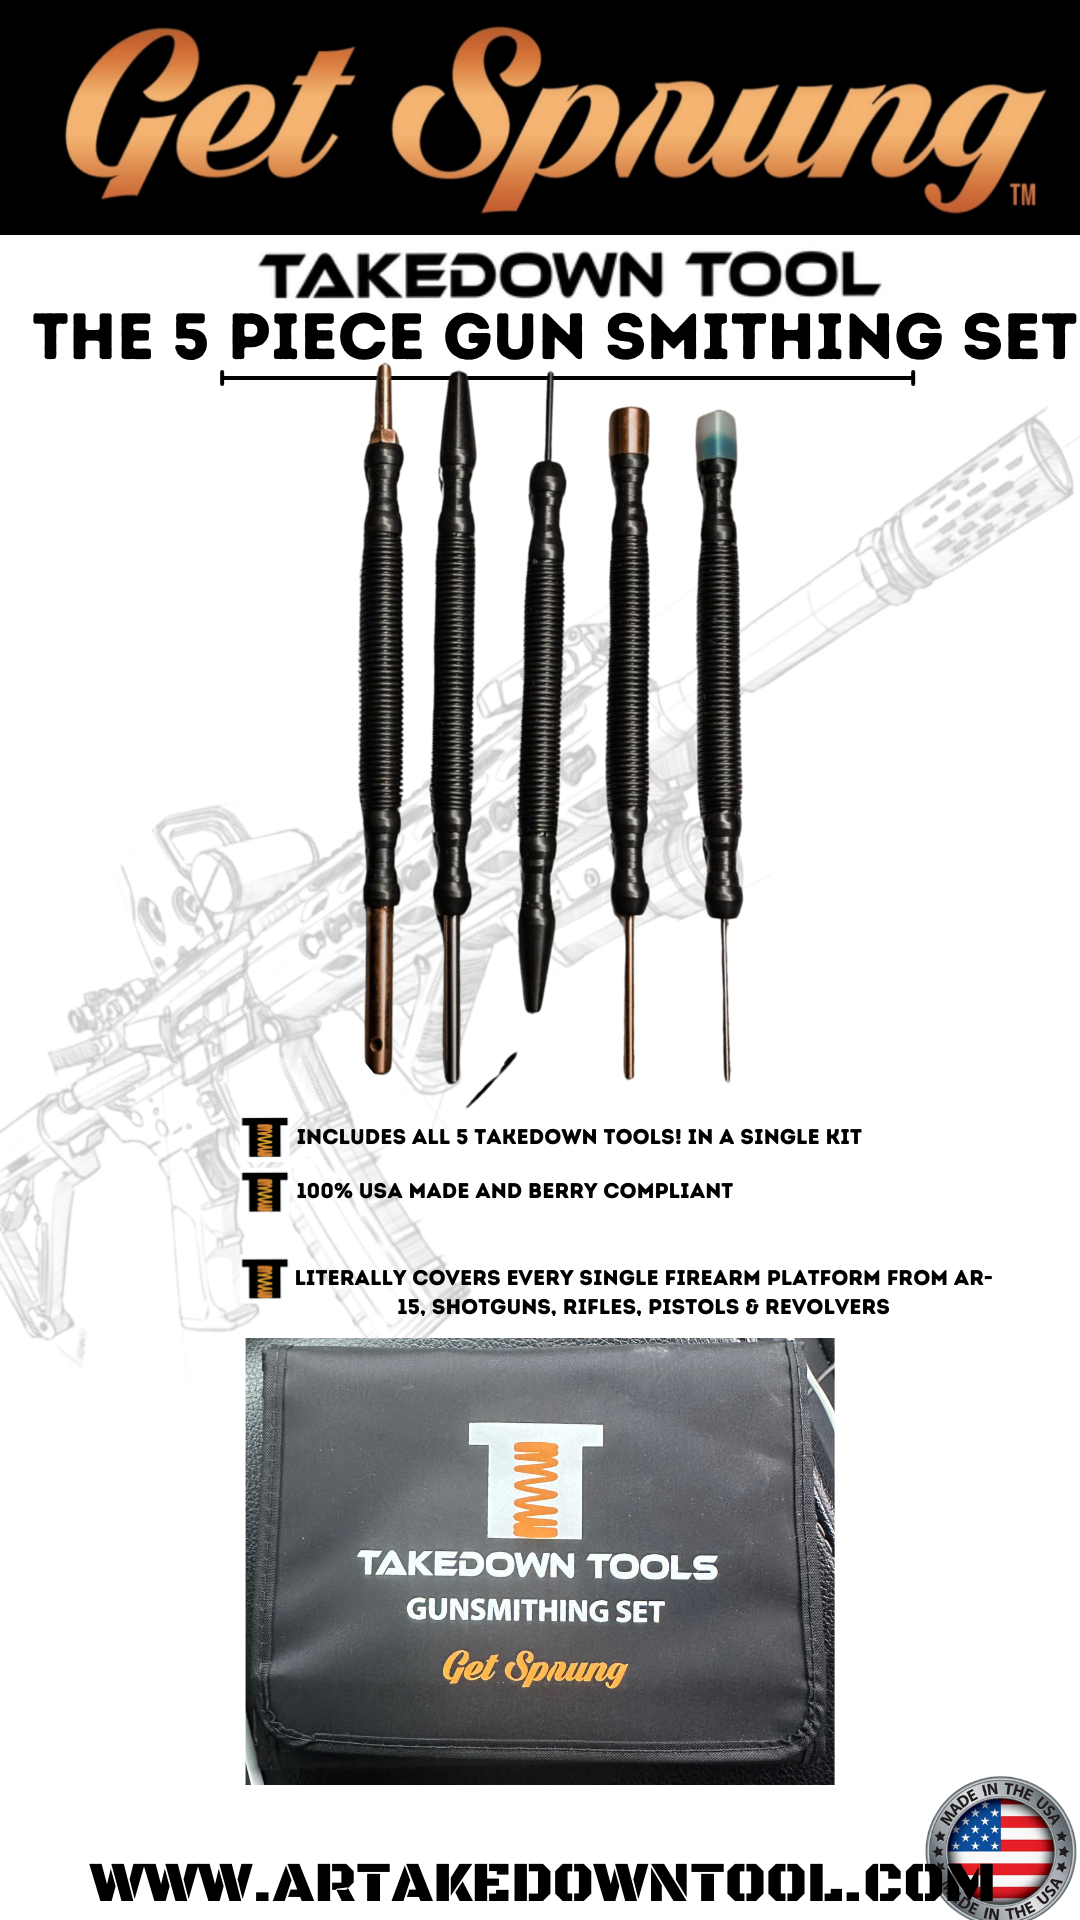 The GUN Smithing set with all 5 tools